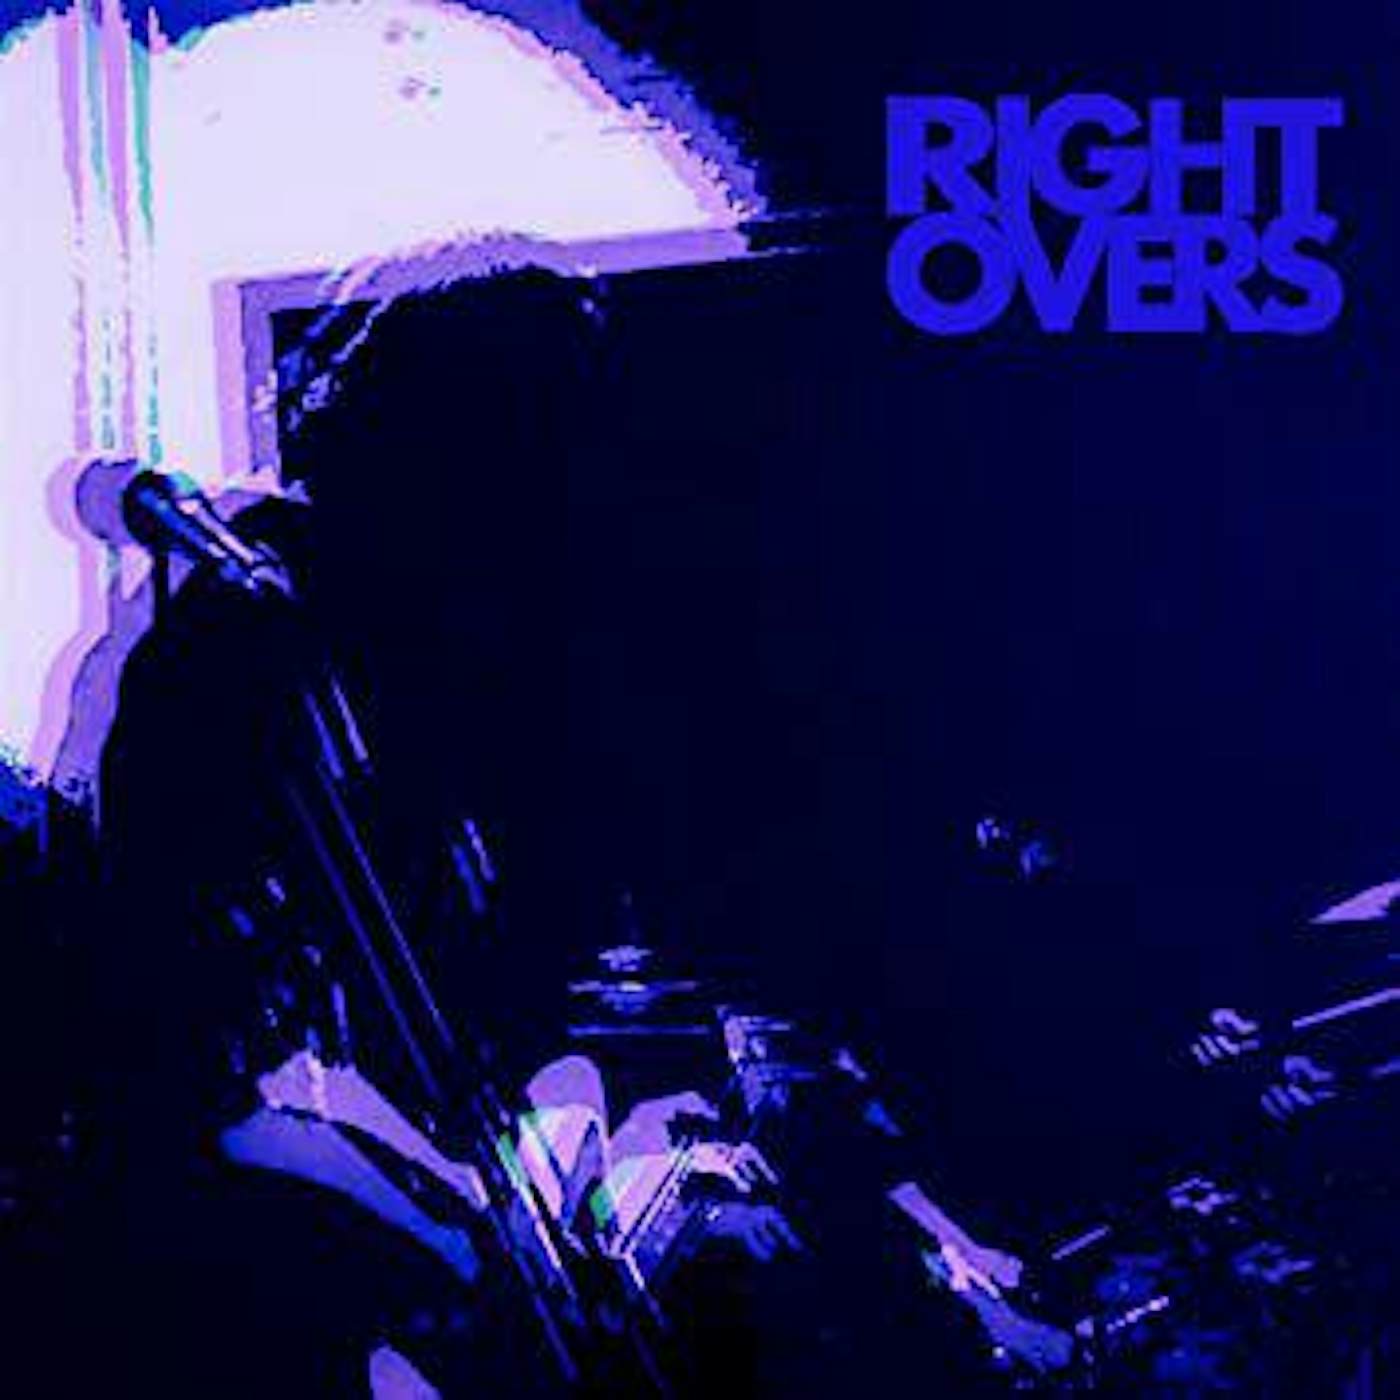 The Rightovers KRUISE CONTROL CD